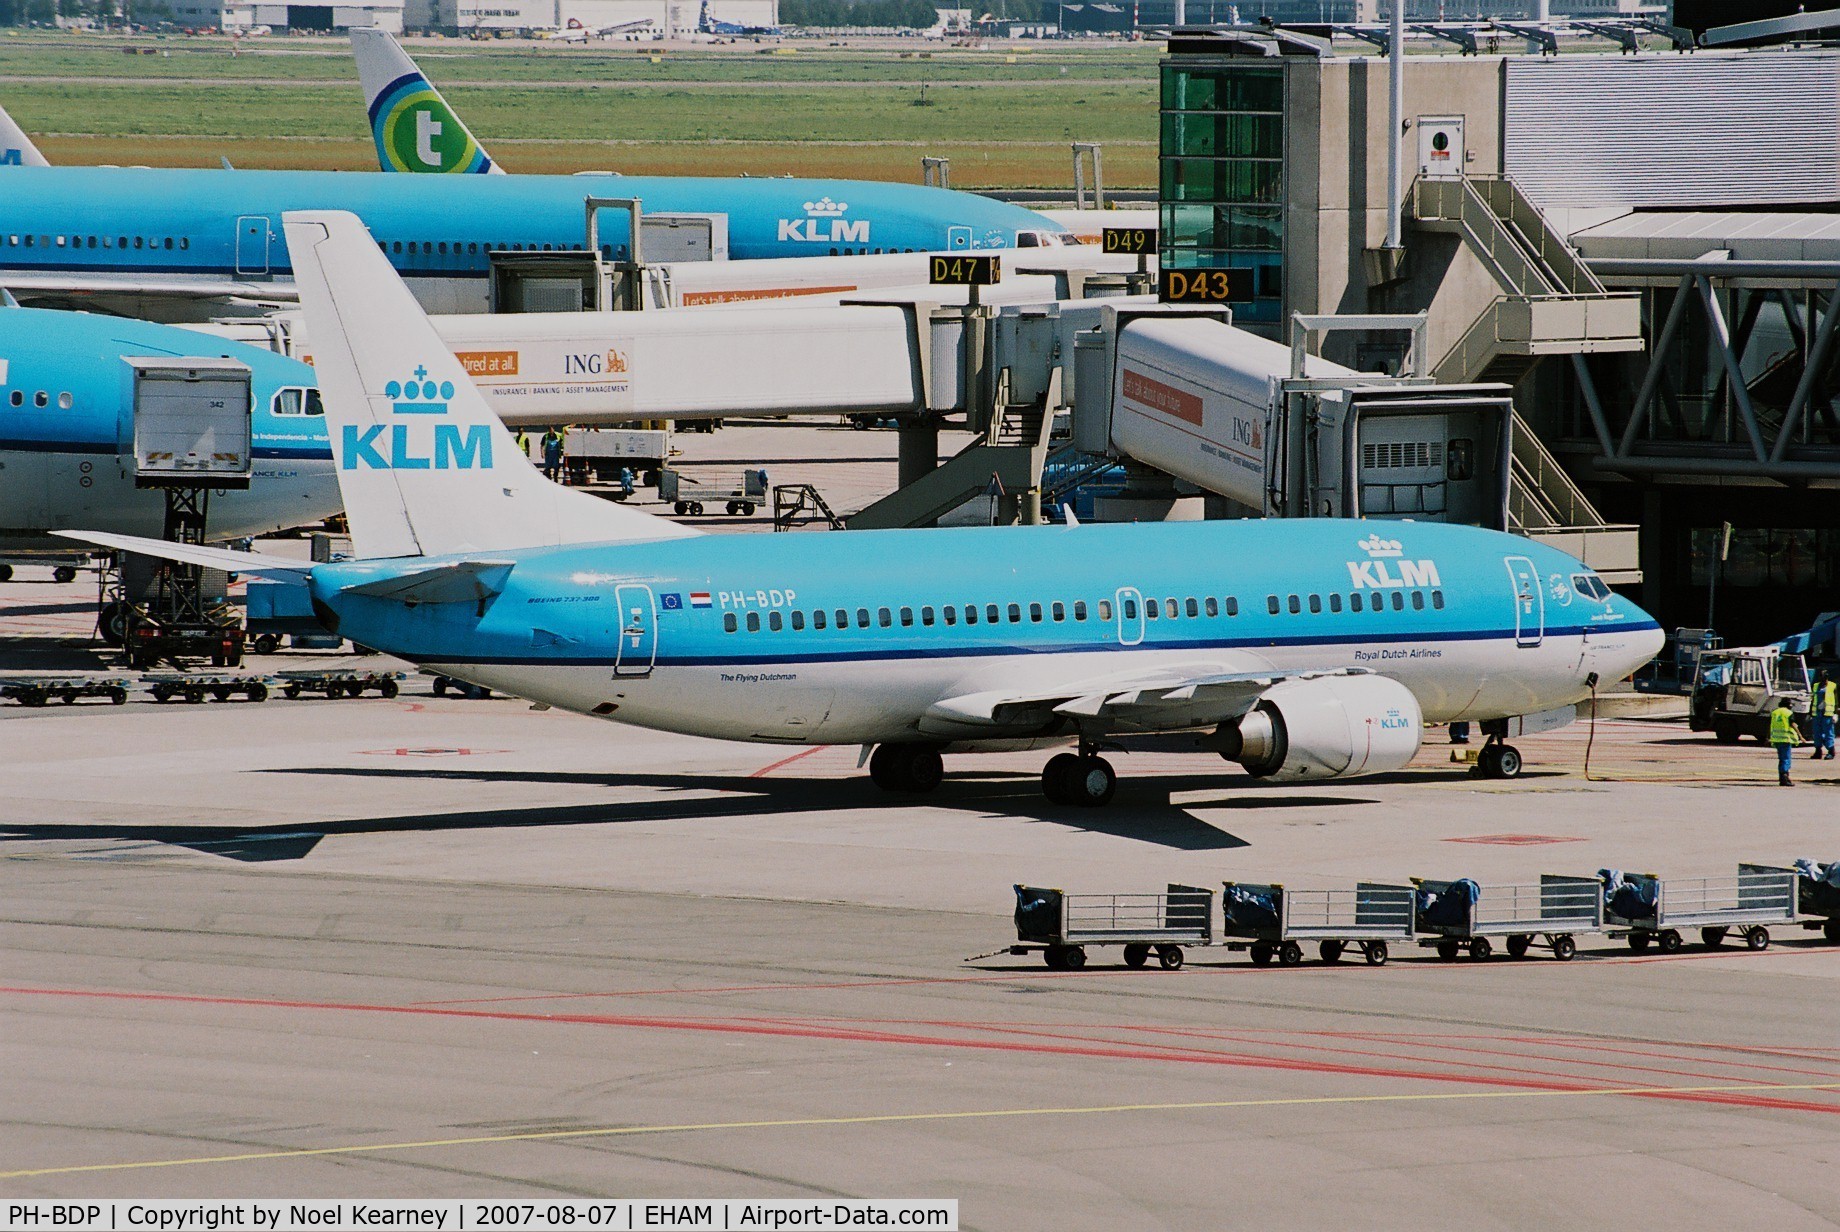 PH-BDP, 1989 Boeing 737-306 C/N 24404, From viewing terrace